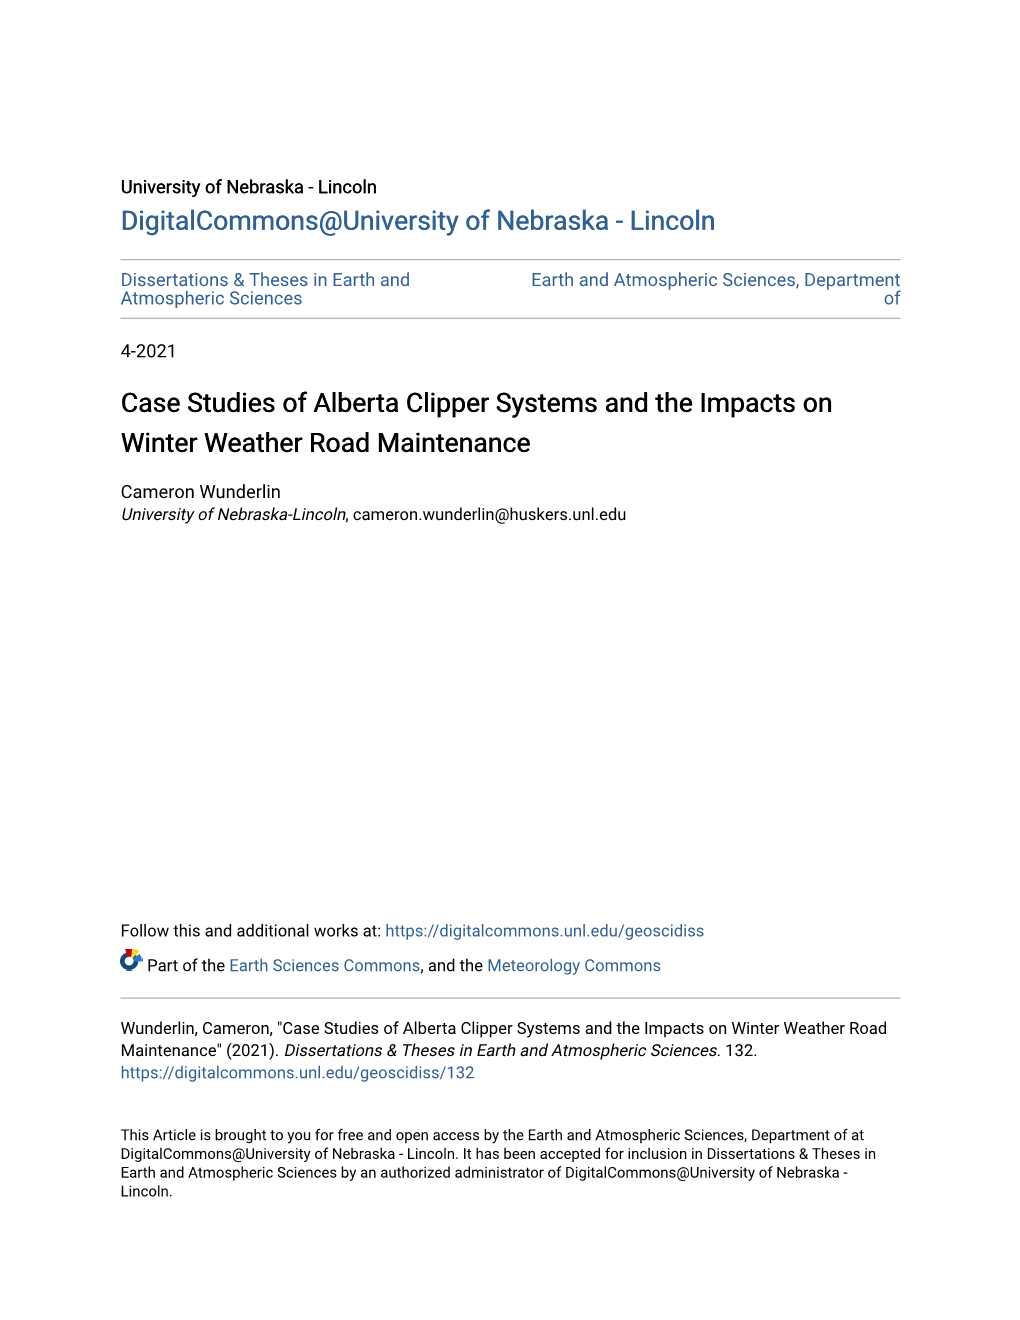 Case Studies of Alberta Clipper Systems and the Impacts on Winter Weather Road Maintenance